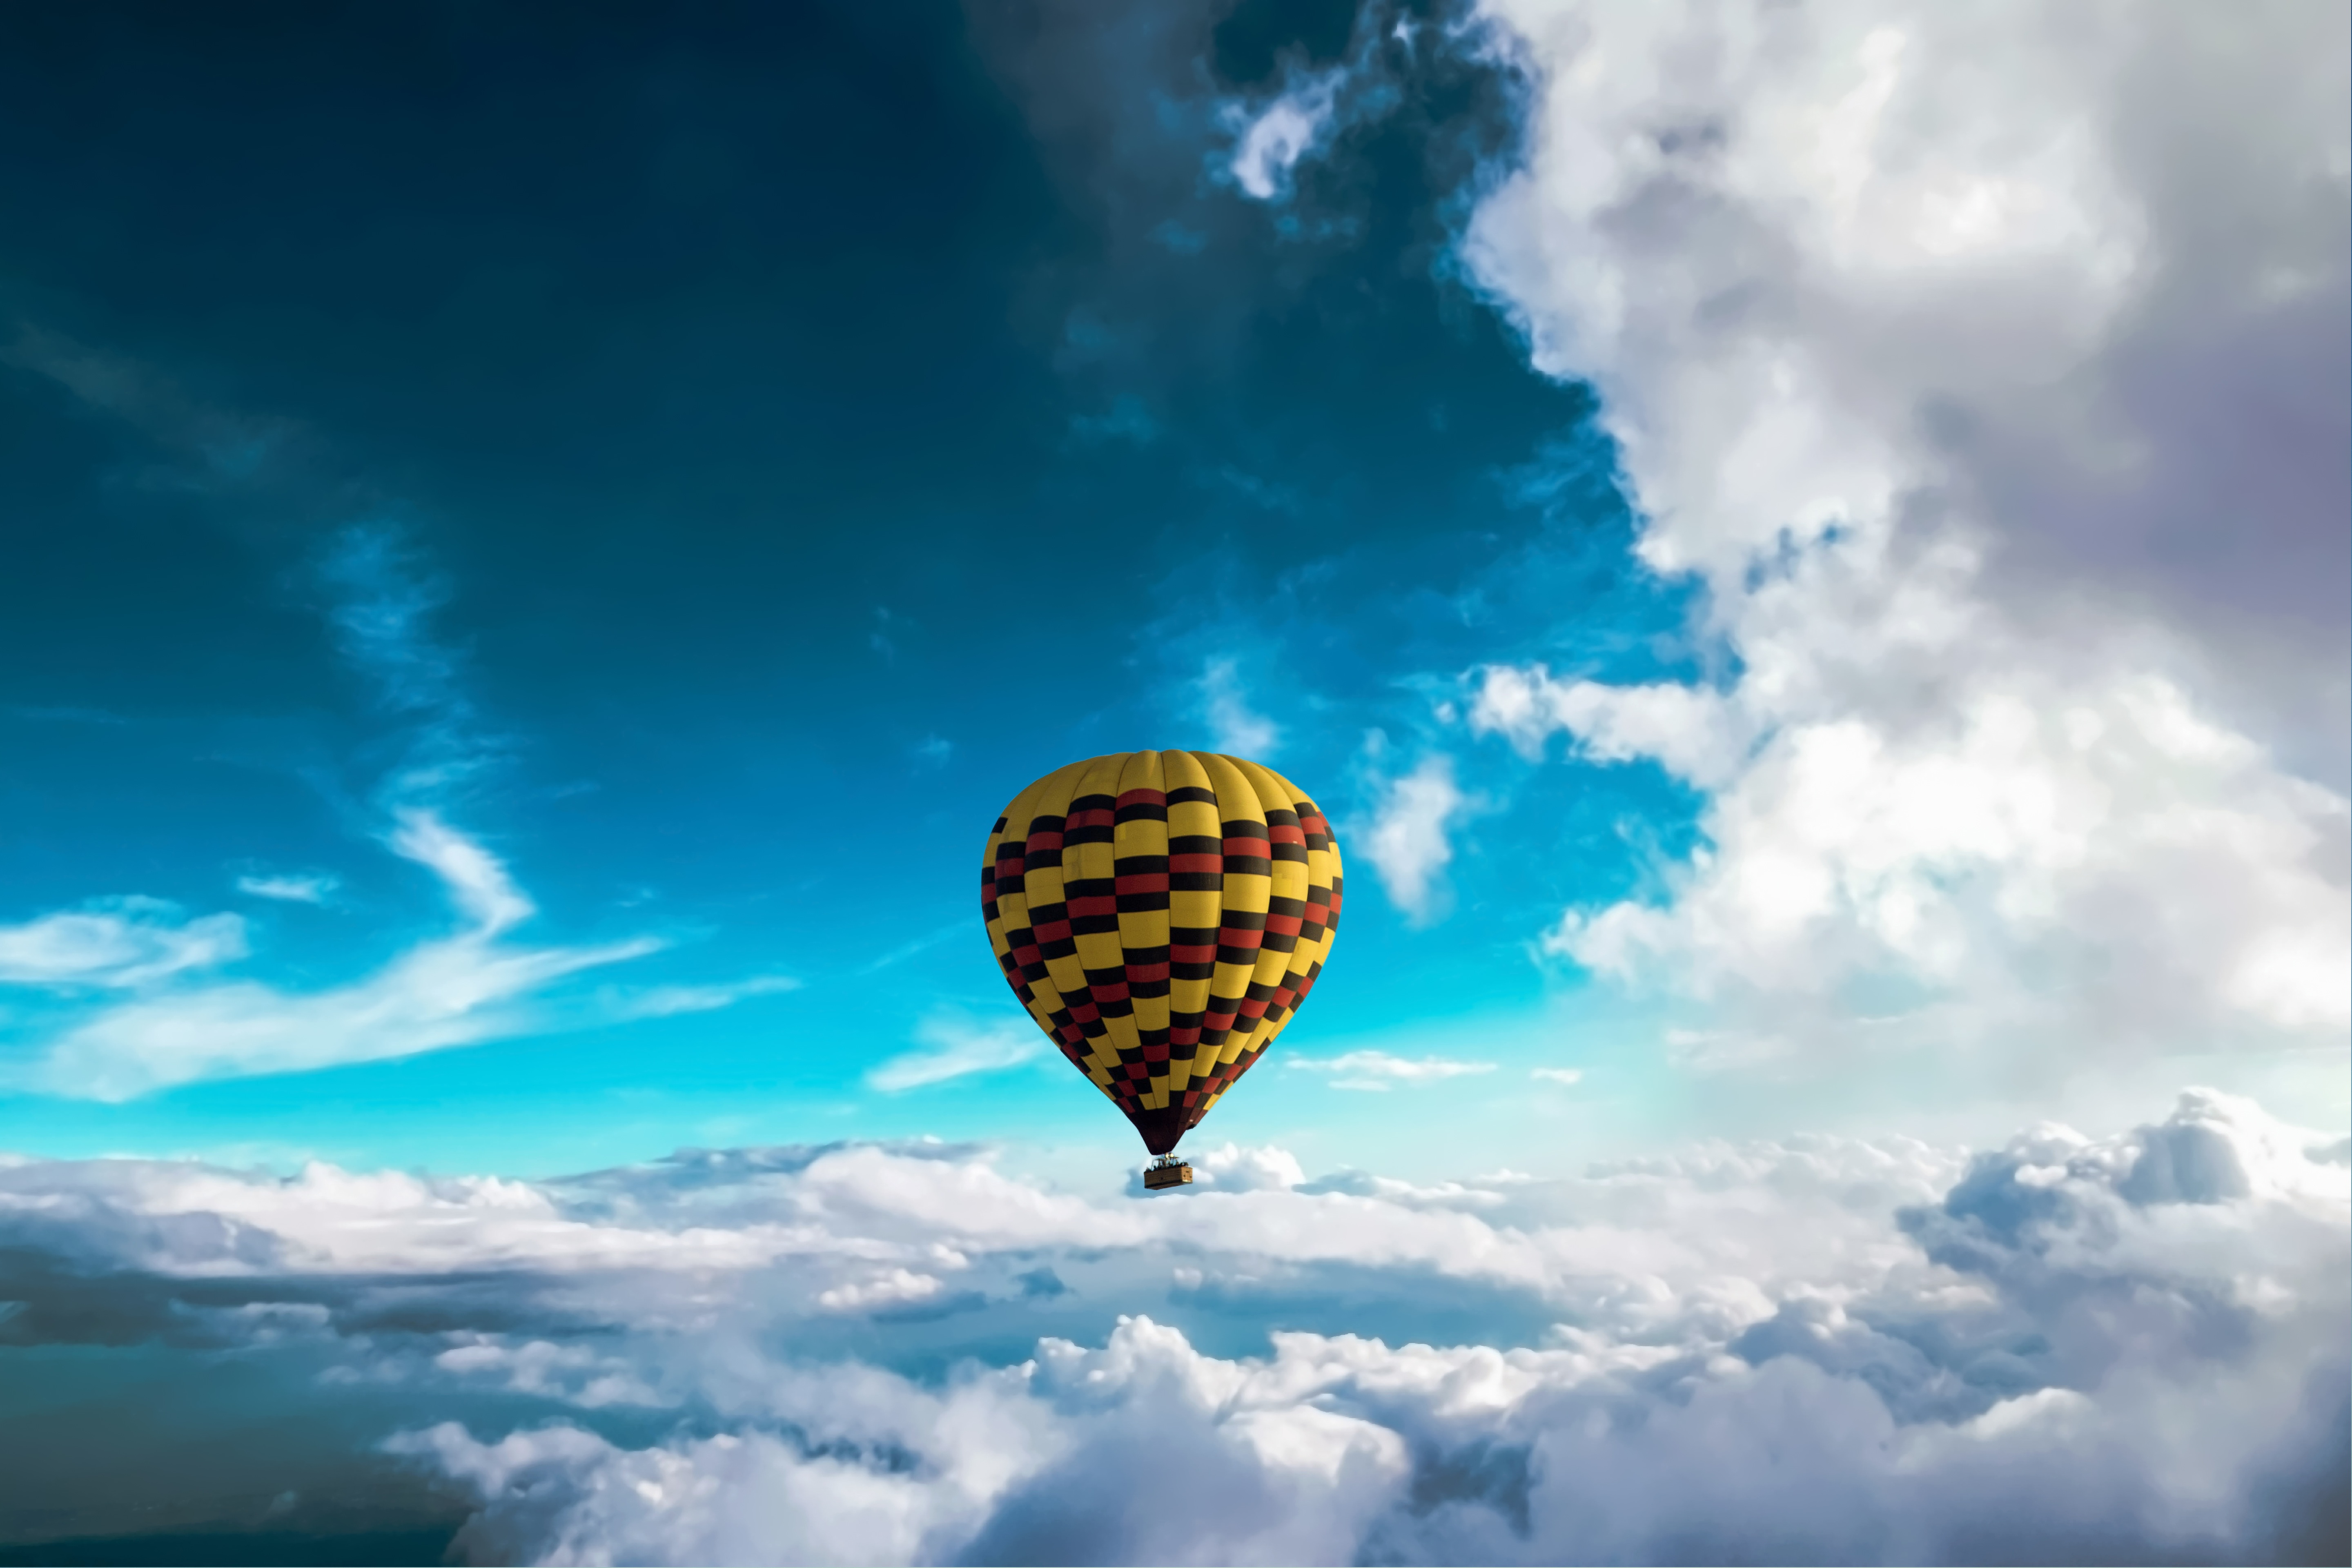 miscellaneous, miscellanea, motley, sky, clouds, flight, height, balloon, variegated images